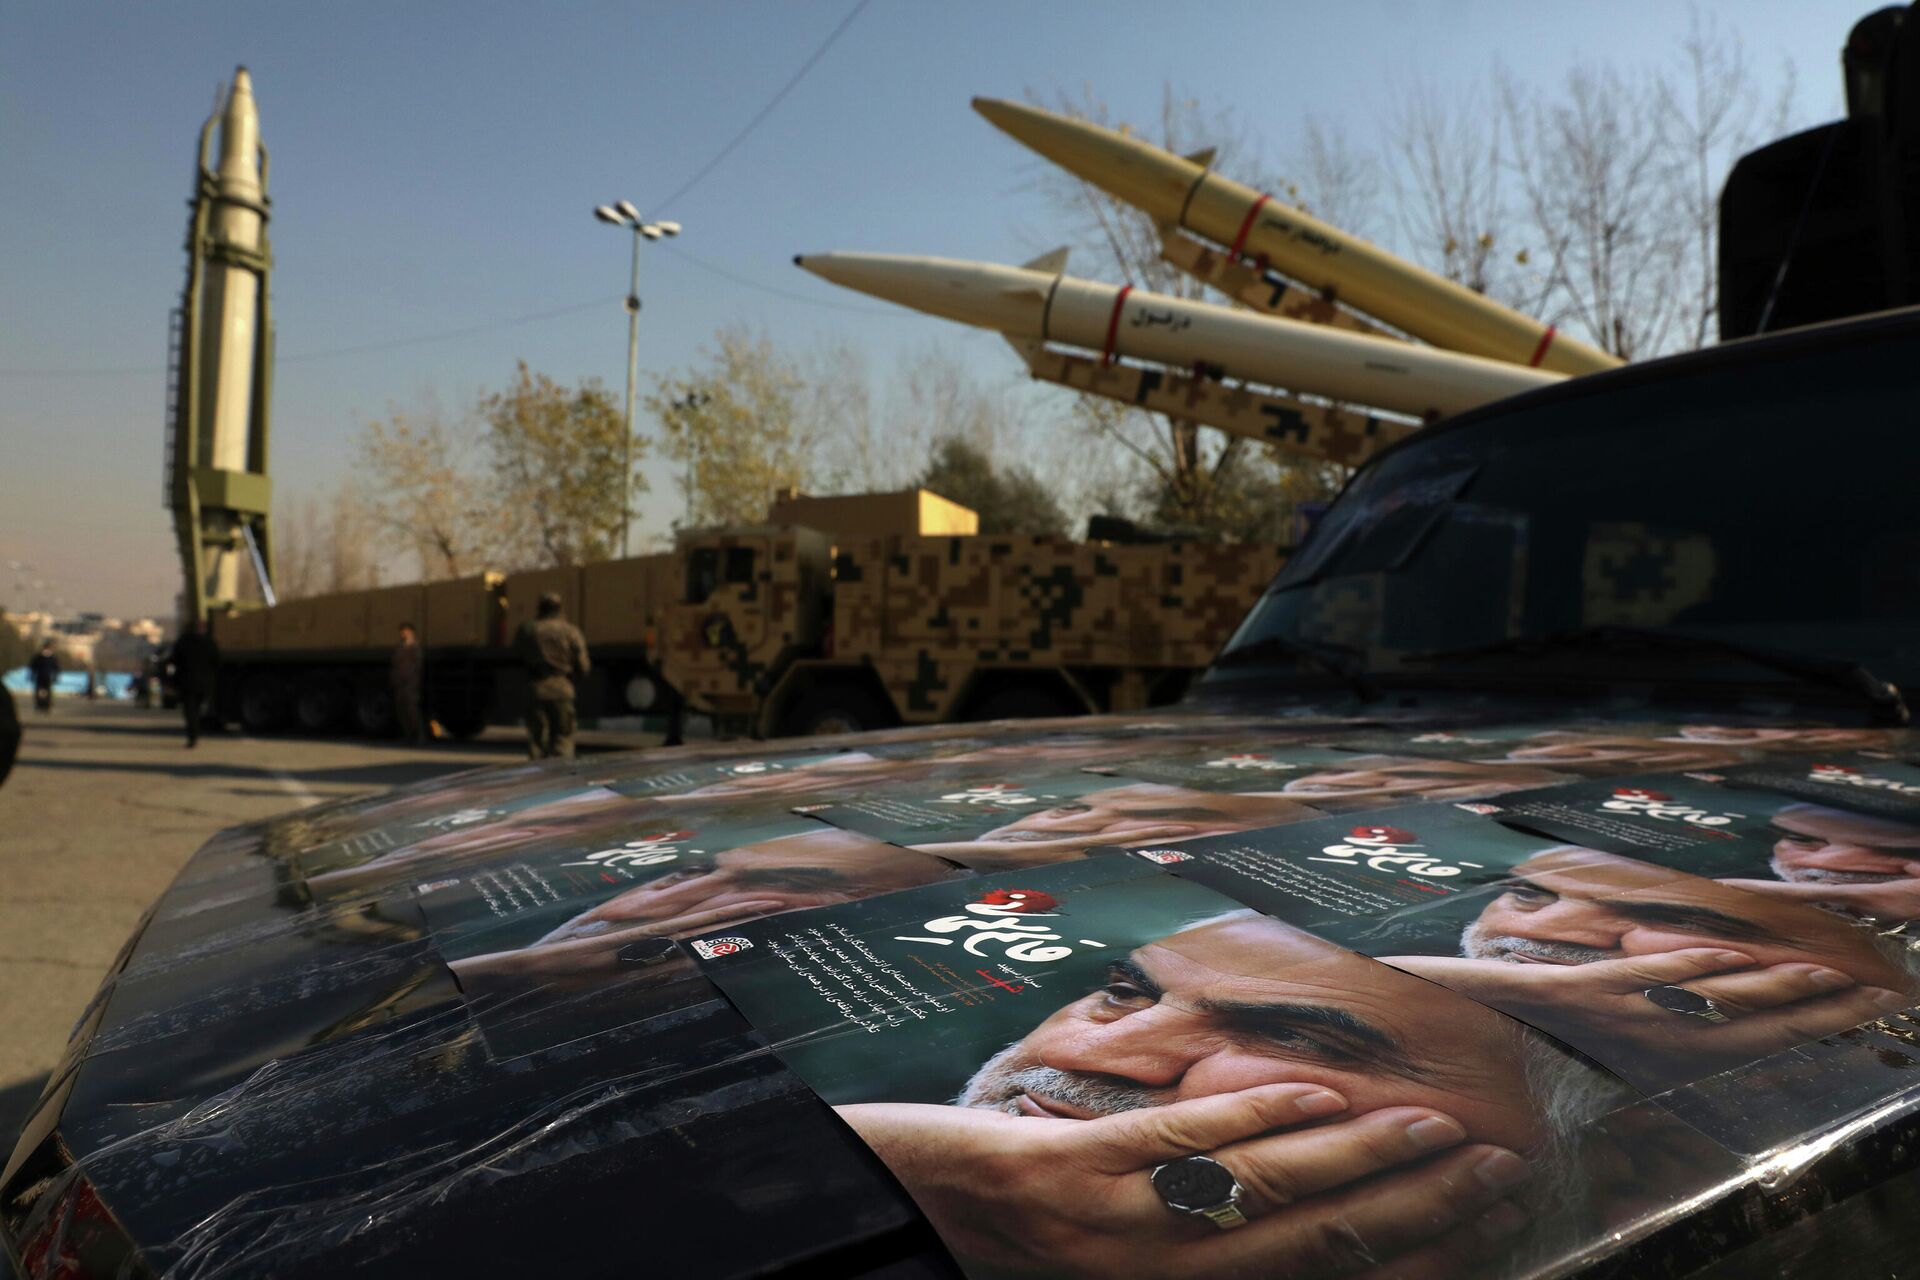 Posters of Iranian Gen. Qassem Soleimani, who was killed in Iraq in a U.S. drone attack in Jan. 3, 2020, are seen in front of Qiam, background left, Zolfaghar, top right, and Dezful missiles displayed in a missile capabilities exhibition by the paramilitary Revolutionary Guard a day prior to second anniversary of Iran's missile strike on U.S. bases in Iraq in retaliation for killing Gen. Soleimani, at Imam Khomeini grand mosque, in Tehran, Iran, Friday, Jan. 7, 2022. Iran put three ballistic missiles on display on Friday, as talks in Vienna aimed at reviving Tehran's nuclear deal with world powers flounder.  - Sputnik International, 1920, 21.04.2024